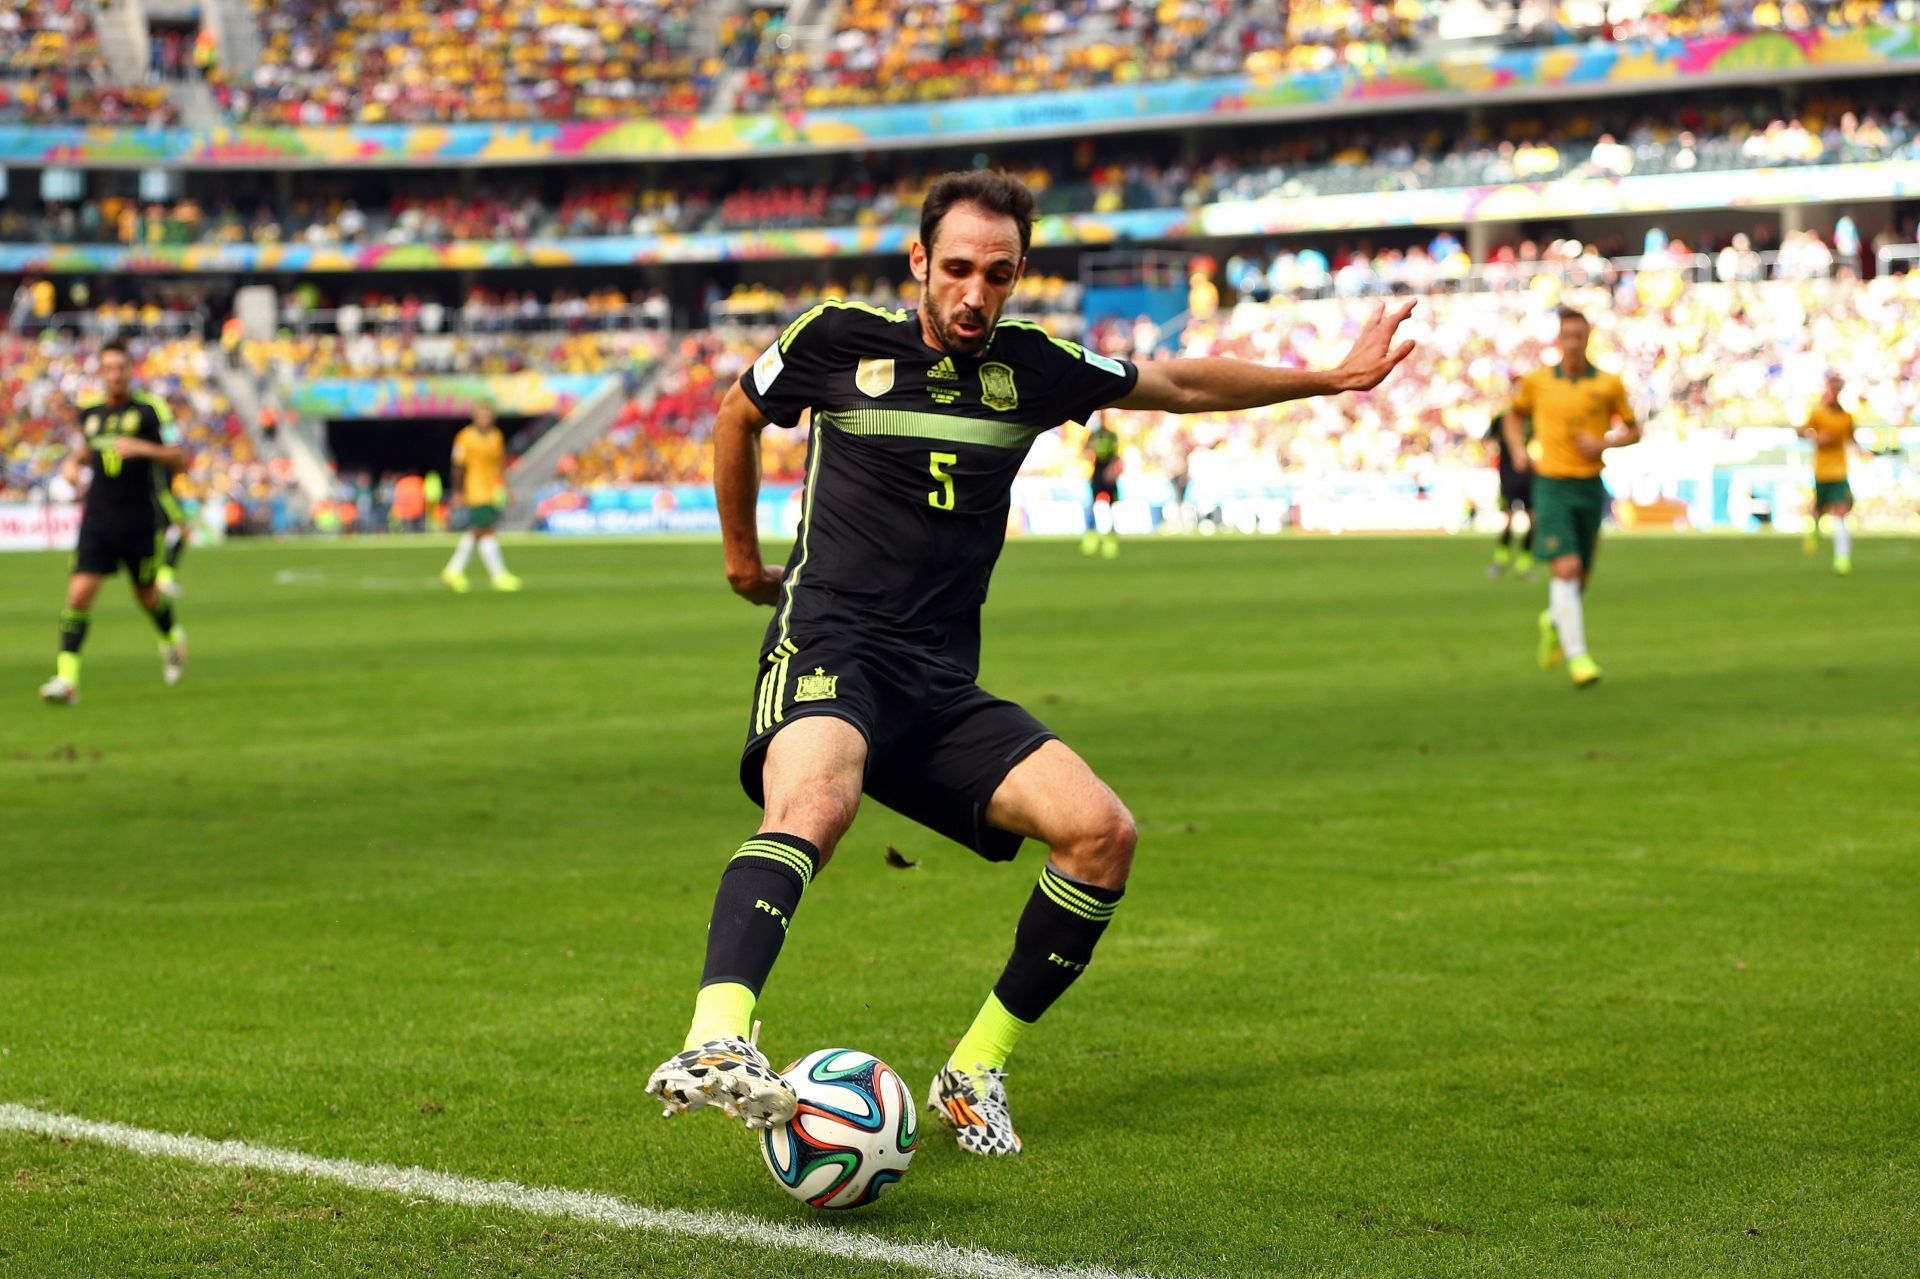 Spanish right-back Juanfran made just 10 appearances for Real